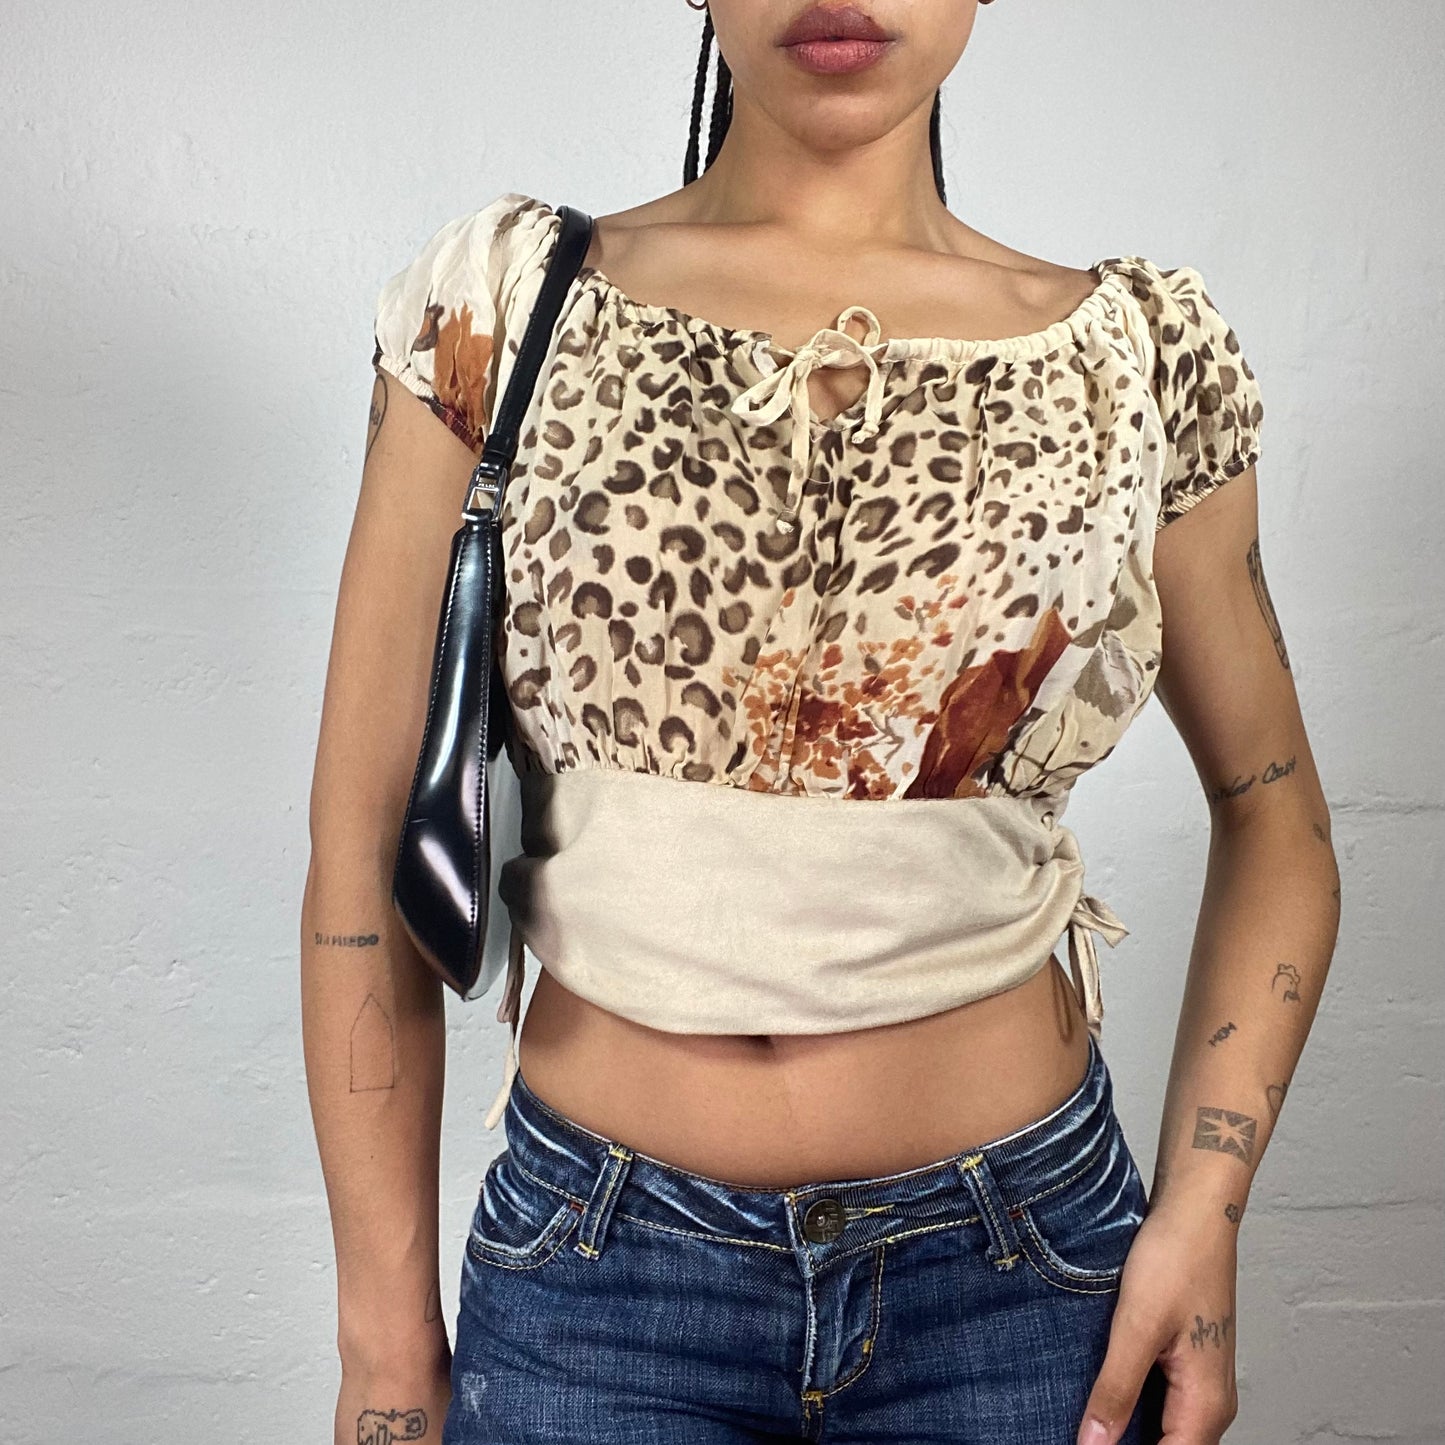 Vintage 2000's Romantic Creamy Beige Chiffon Off Shoulder Ruffled Sleeves Top with Side Bindings and Animal Print (M)